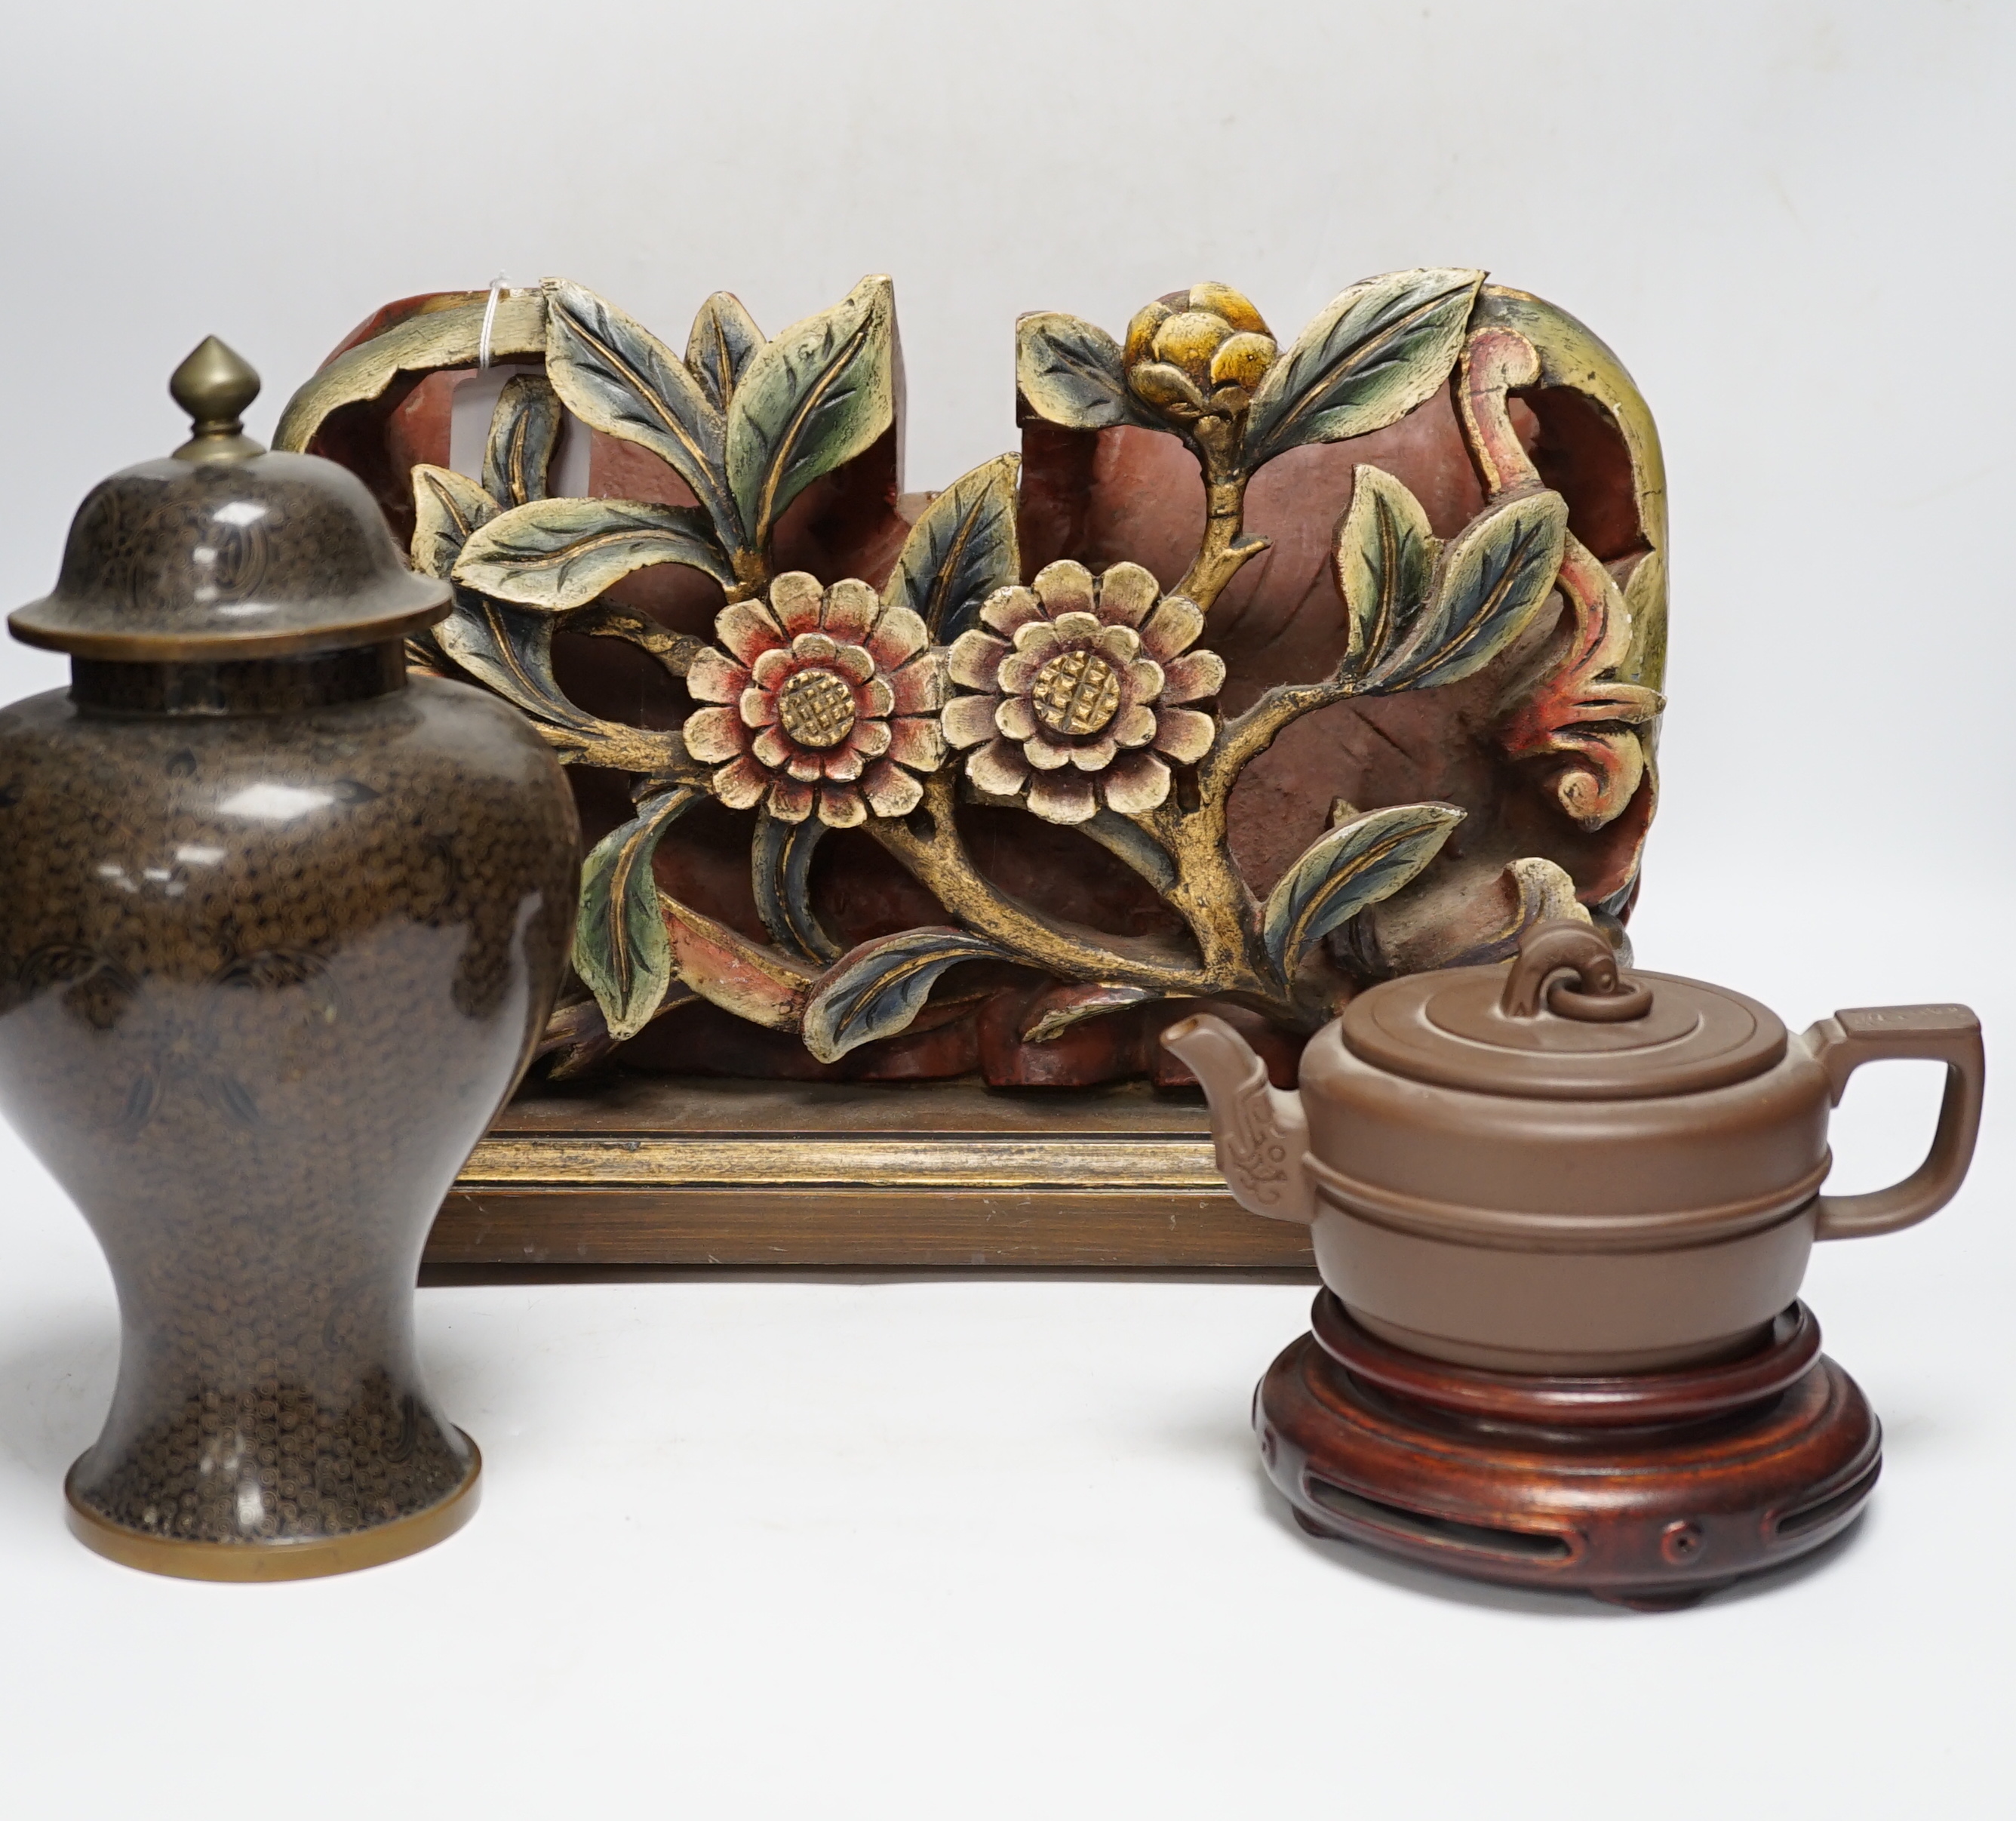 A Chinese floral wooden carving, 40cm wide, together with a Chinese cloisonné enamel vase and cover, 25cm tall, and a Chinese Yixing redware teapot